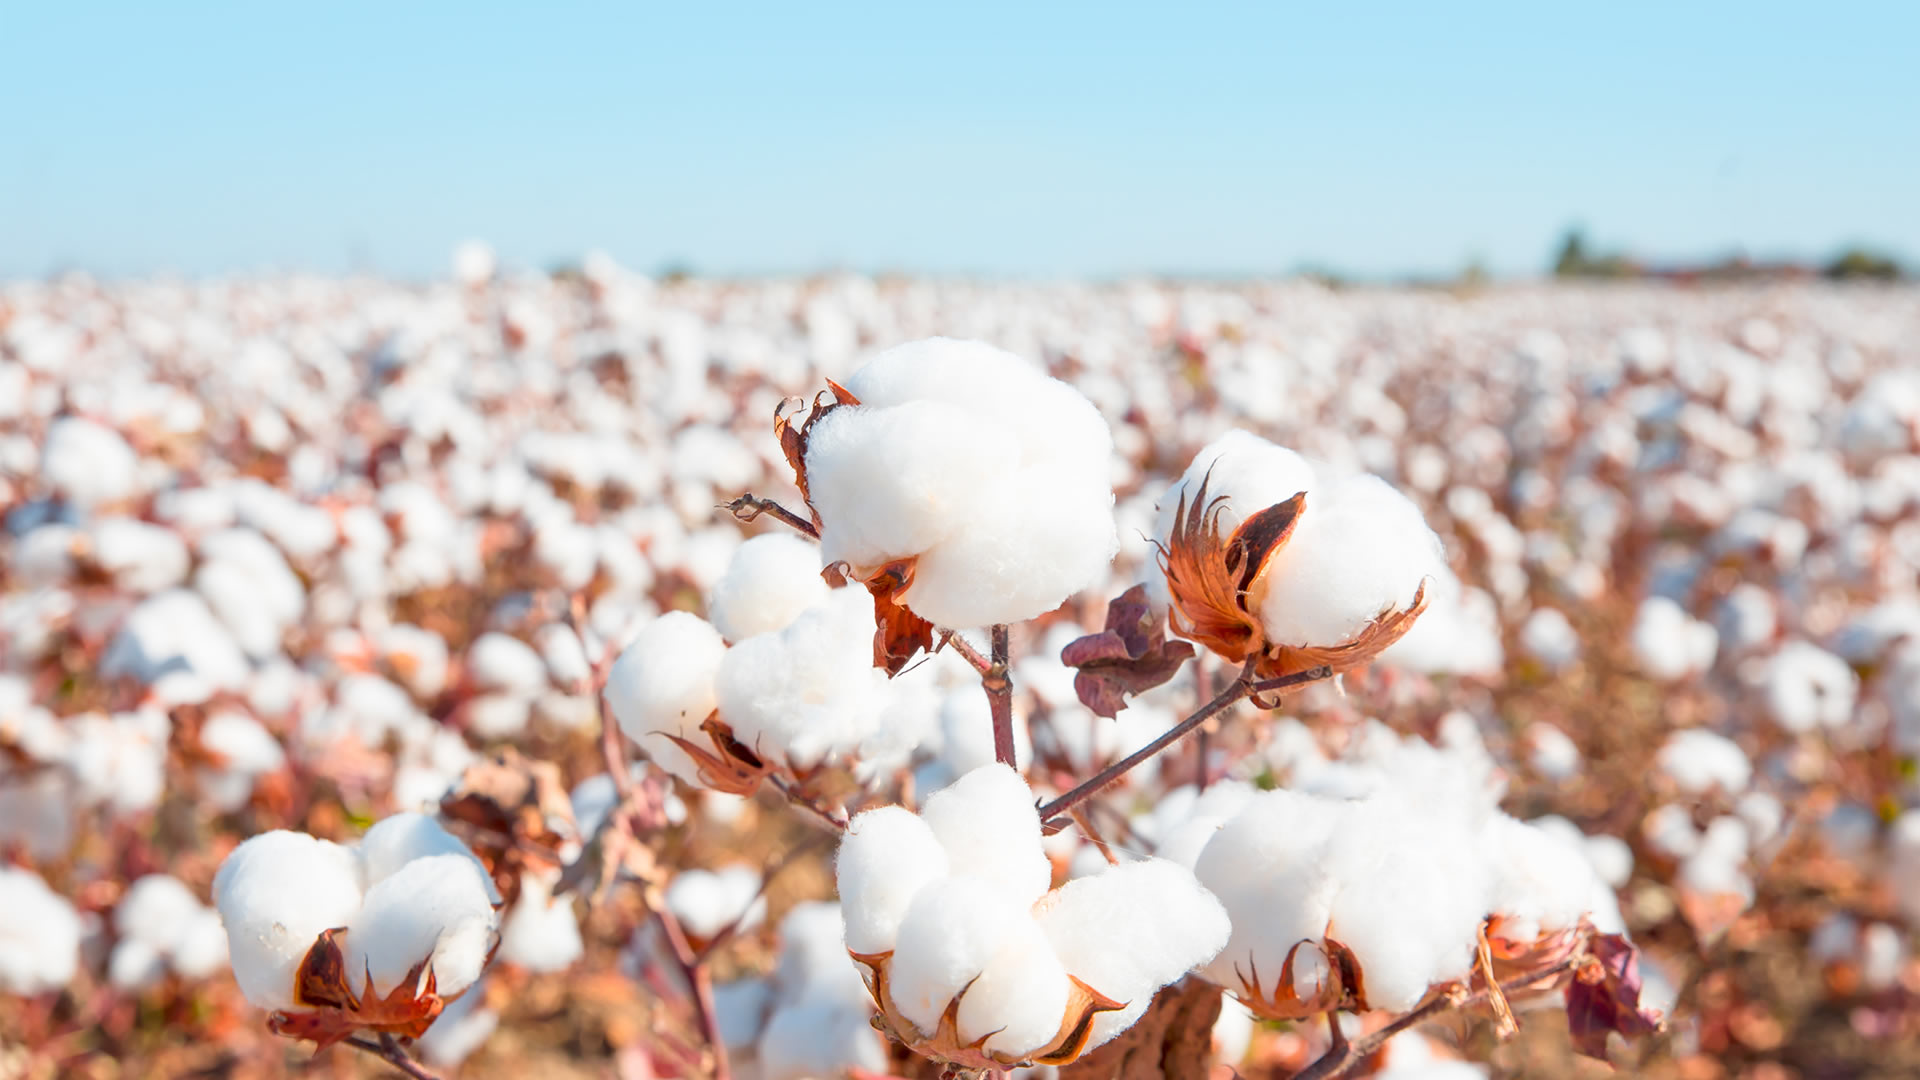 Cotton output hits record low in Pakistan’s history